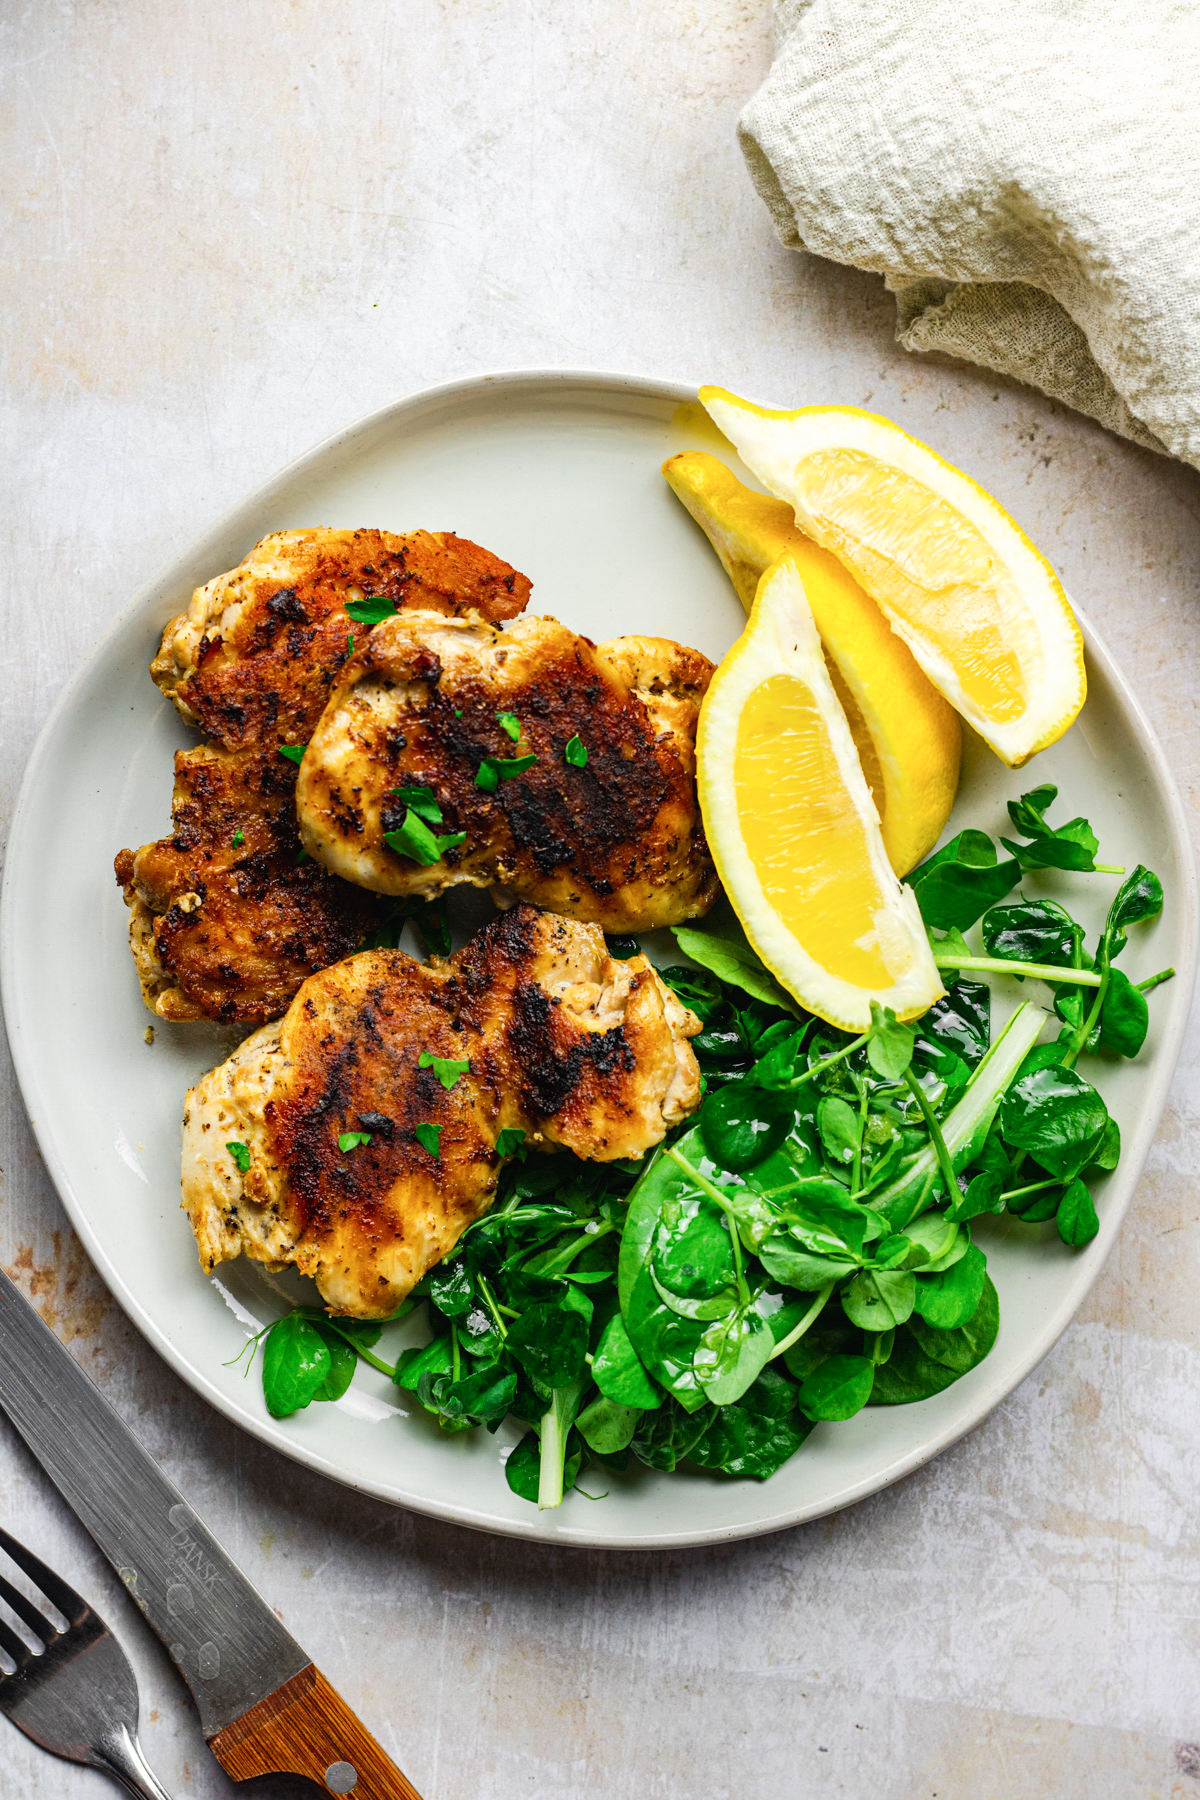 Grilled chicken thighs on a plate served with lemon and greens